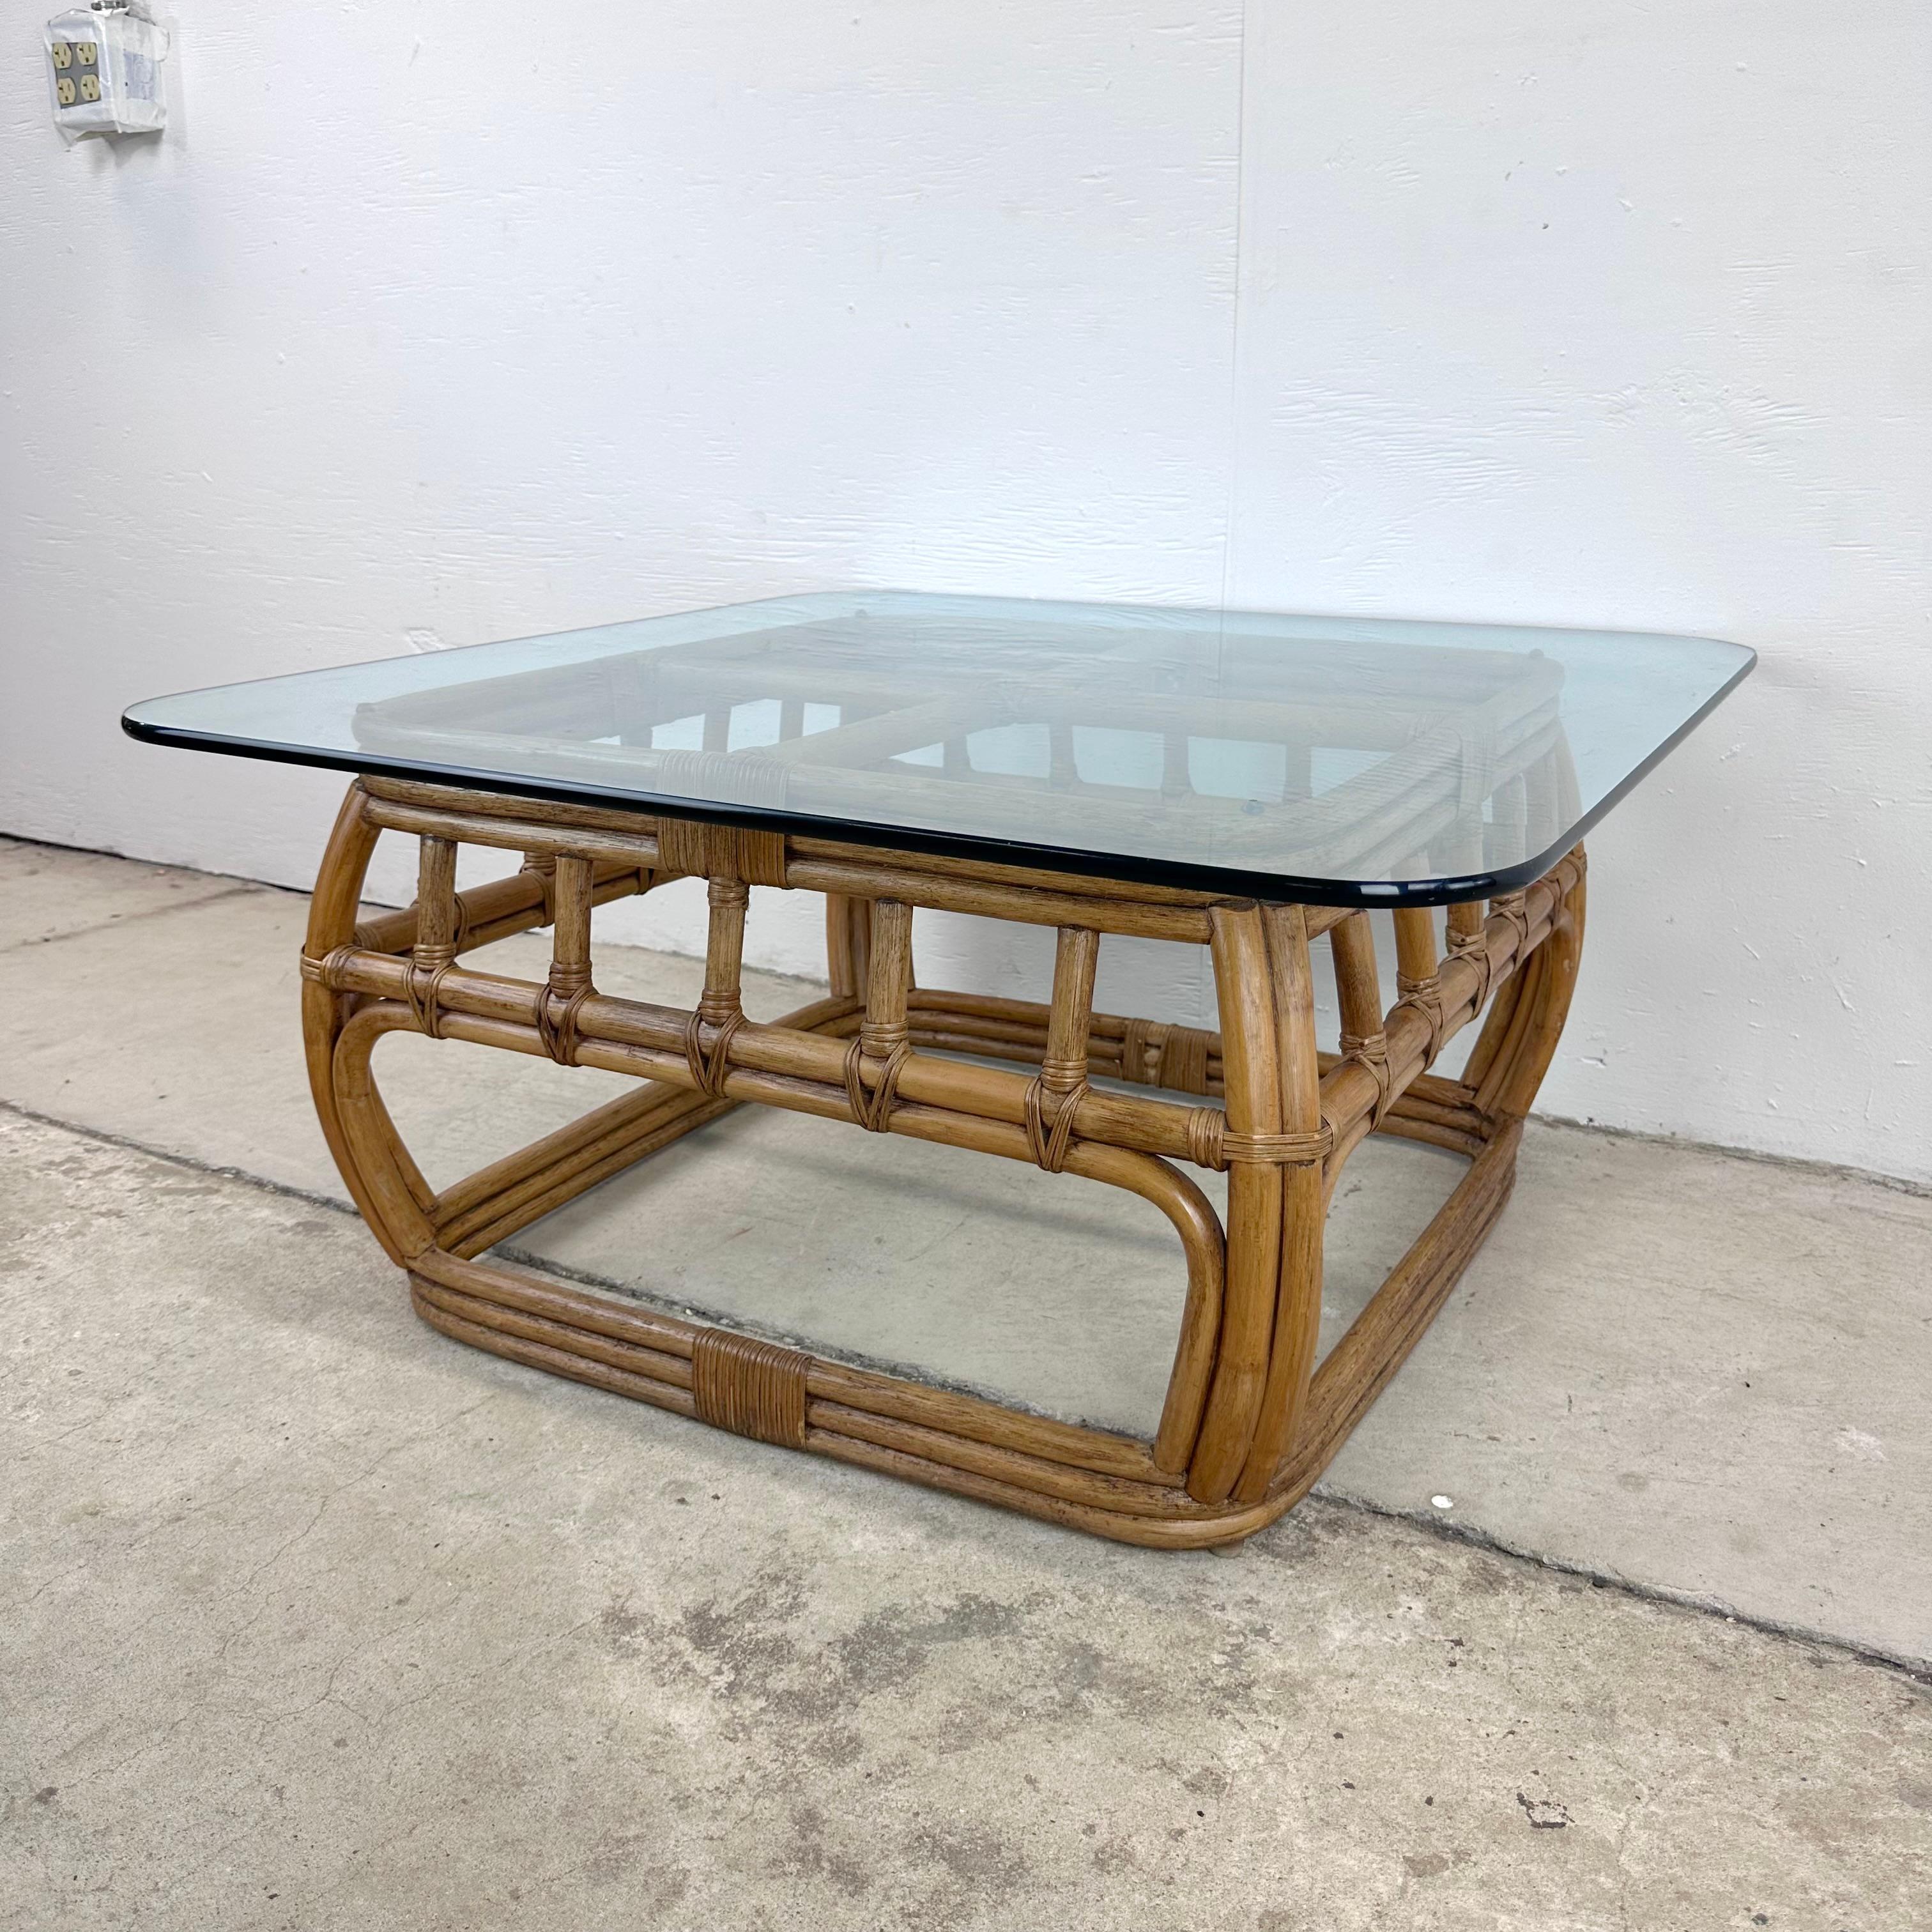 This Ficks Reed Bamboo and Glass-Top Coffee Table, makes a boho chic centerpiece that exudes the quintessential charm of the 1970s. This exquisite coffee table effortlessly blends natural textures and modern design, making it a standout addition to